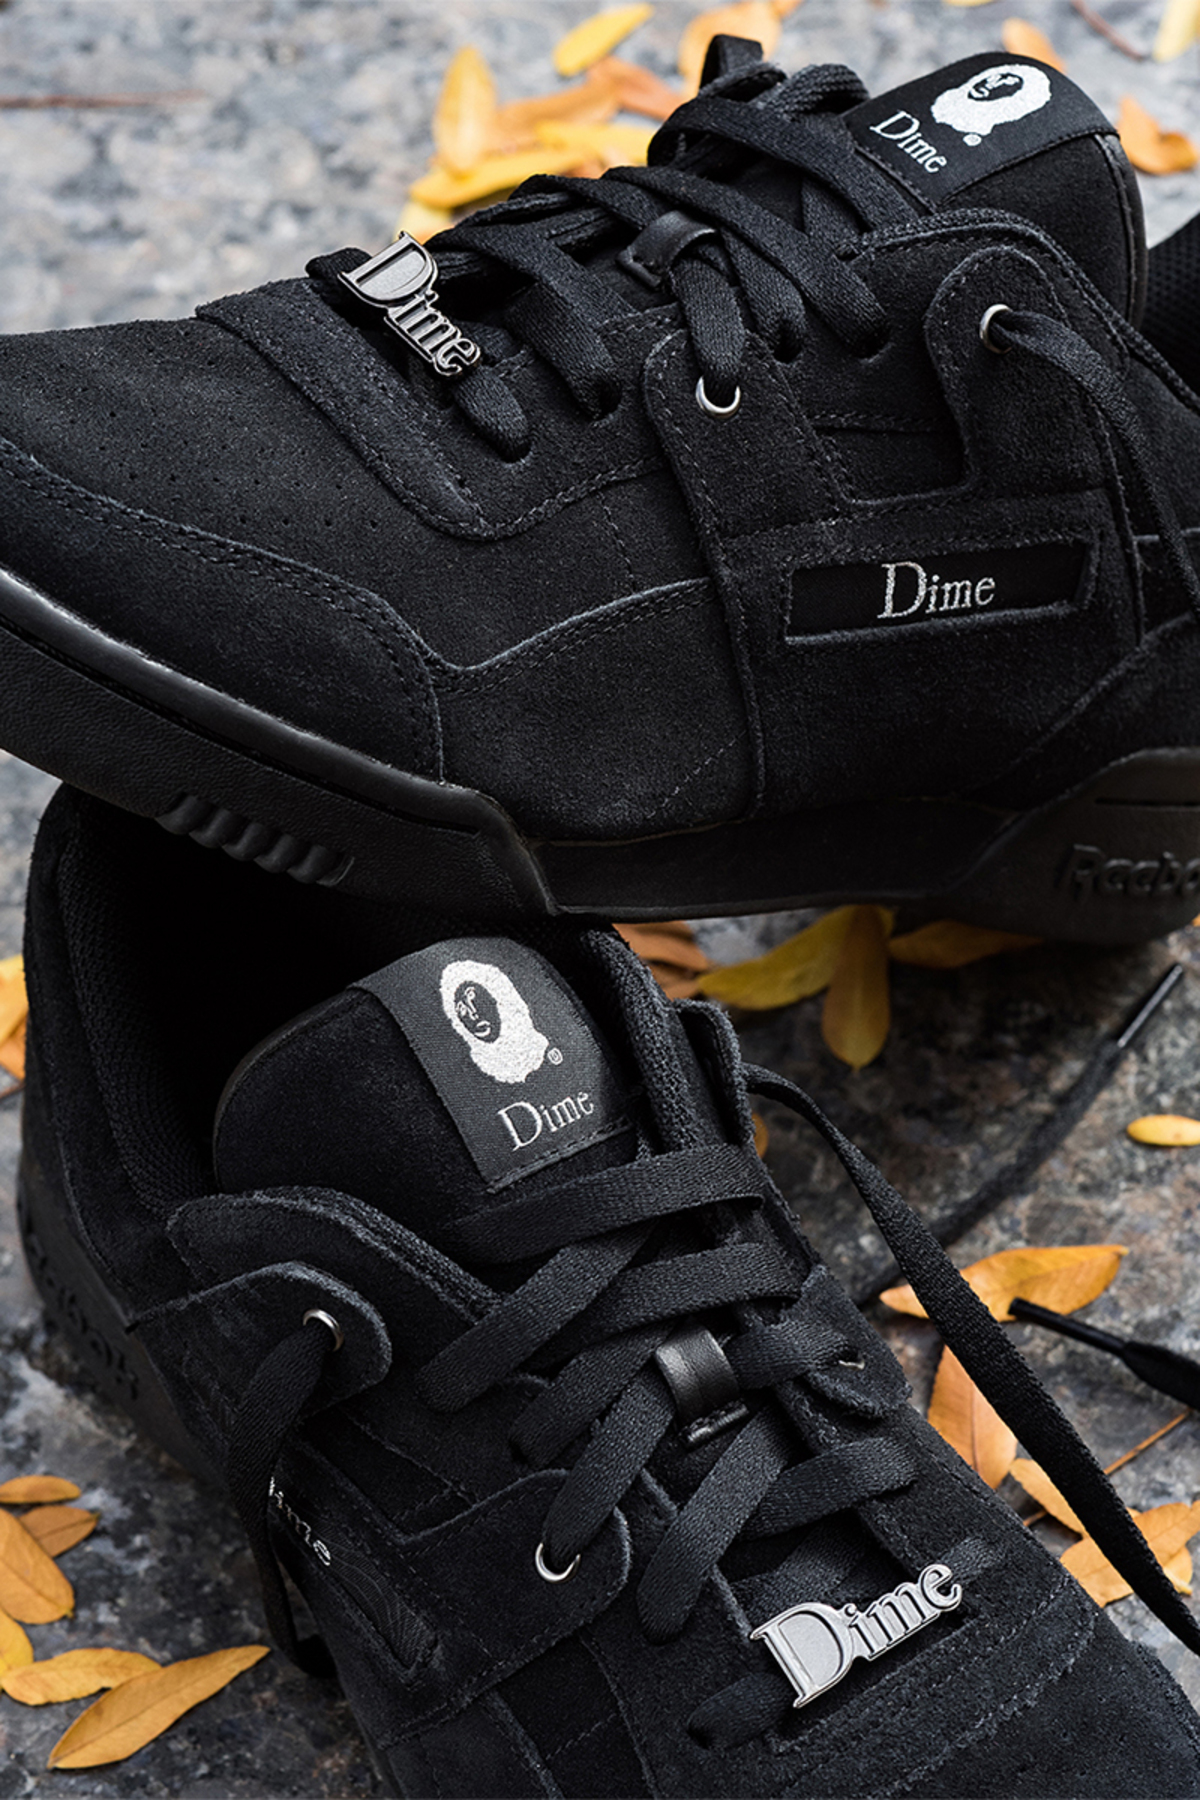 Dime & Reebok Join Forces for Workout Plus Footwear Capsule